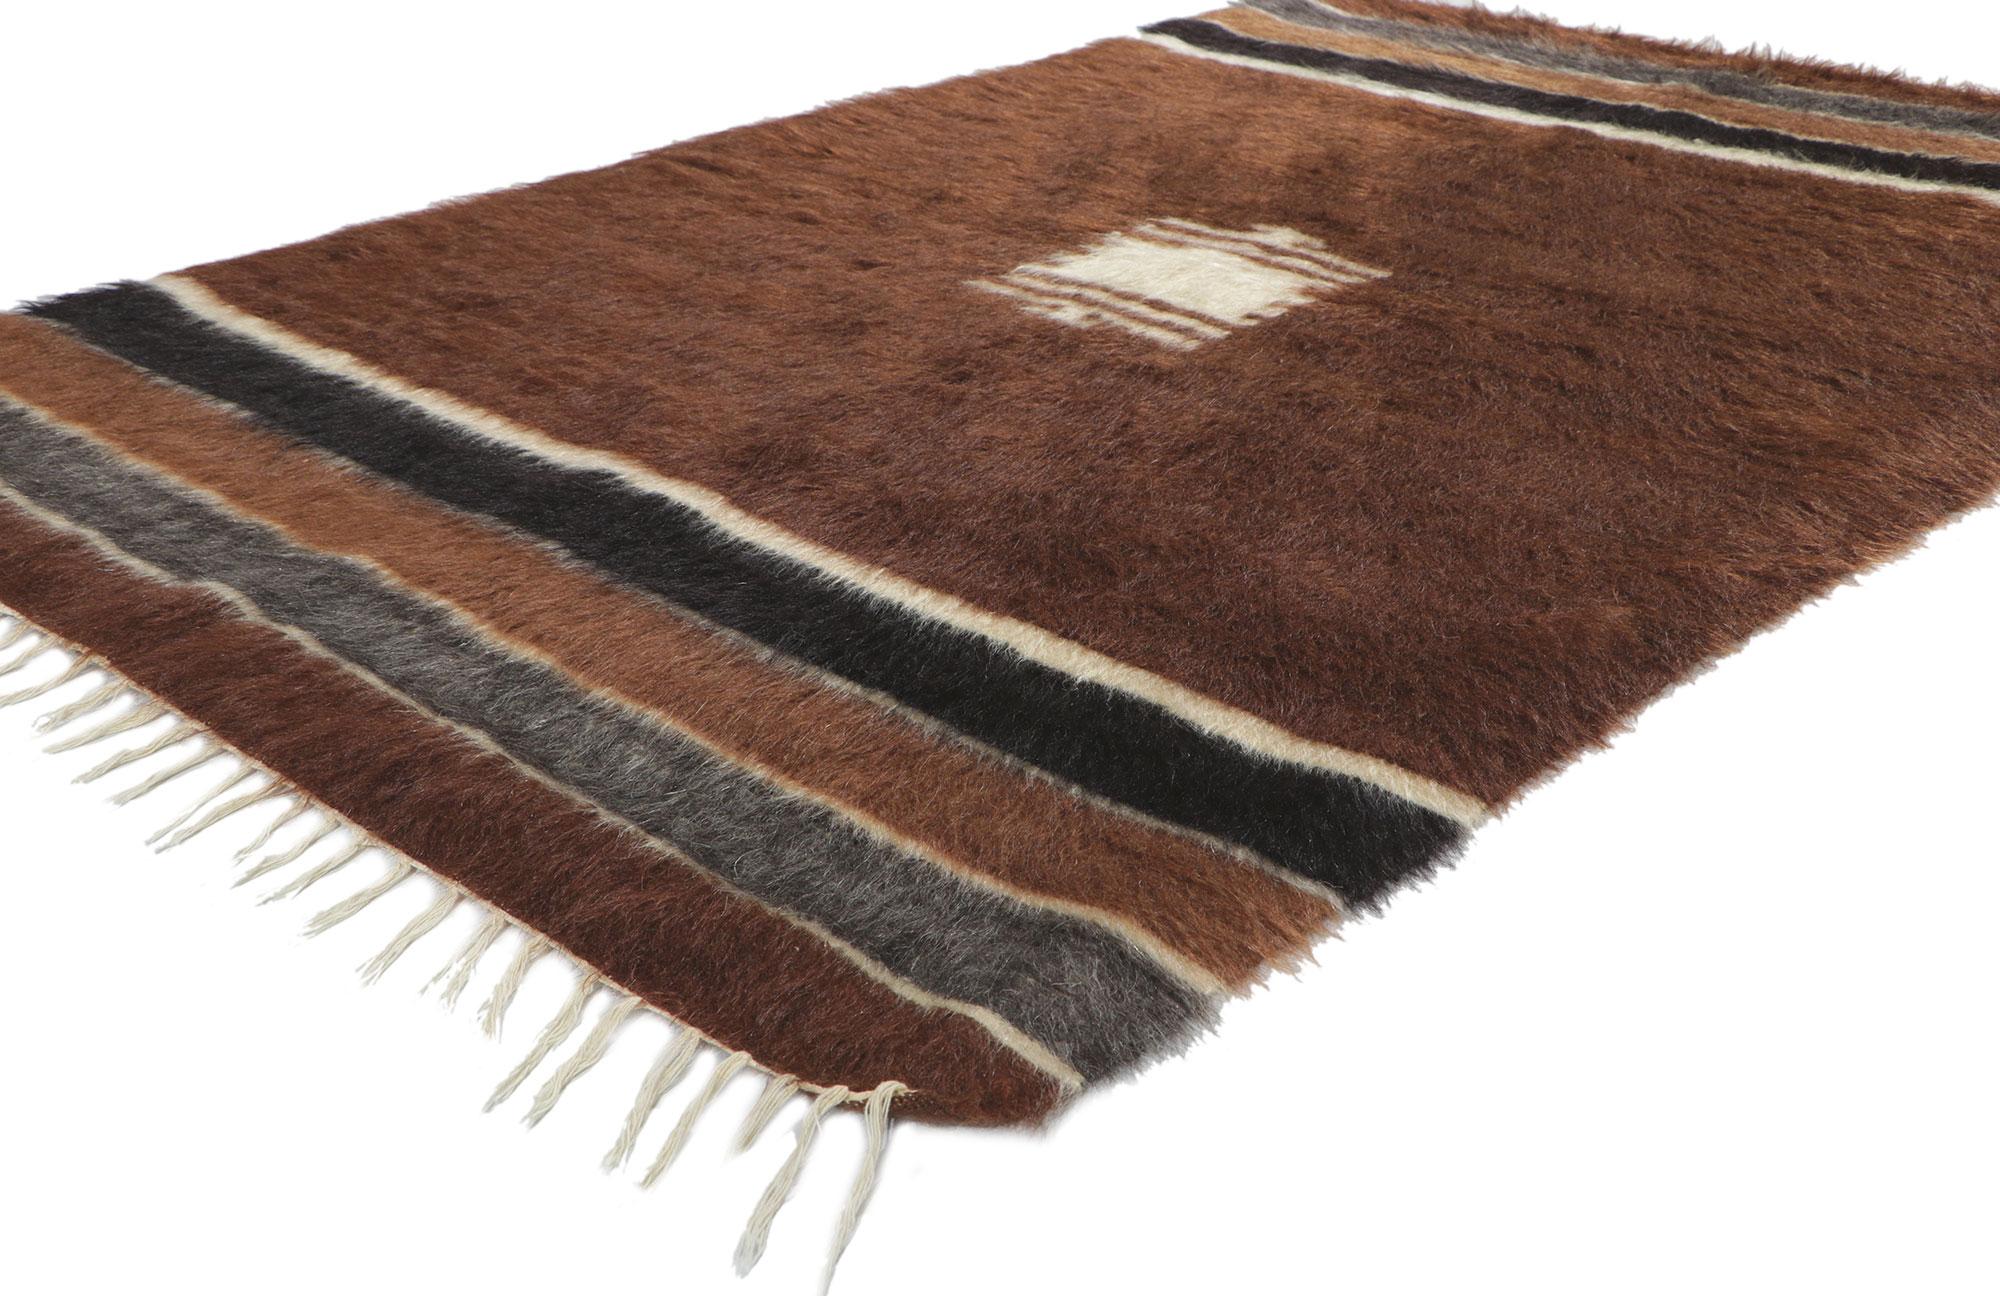 53858 Vintage Turkish Angora Wool Blanket Kilim rug, 04'04 x 06'06?. With its shaggy pile, incredible detail and texture, this handwoven Turkish angora kilim rug is a captivating vision of woven beauty. The eye-catching geometric design and earthy